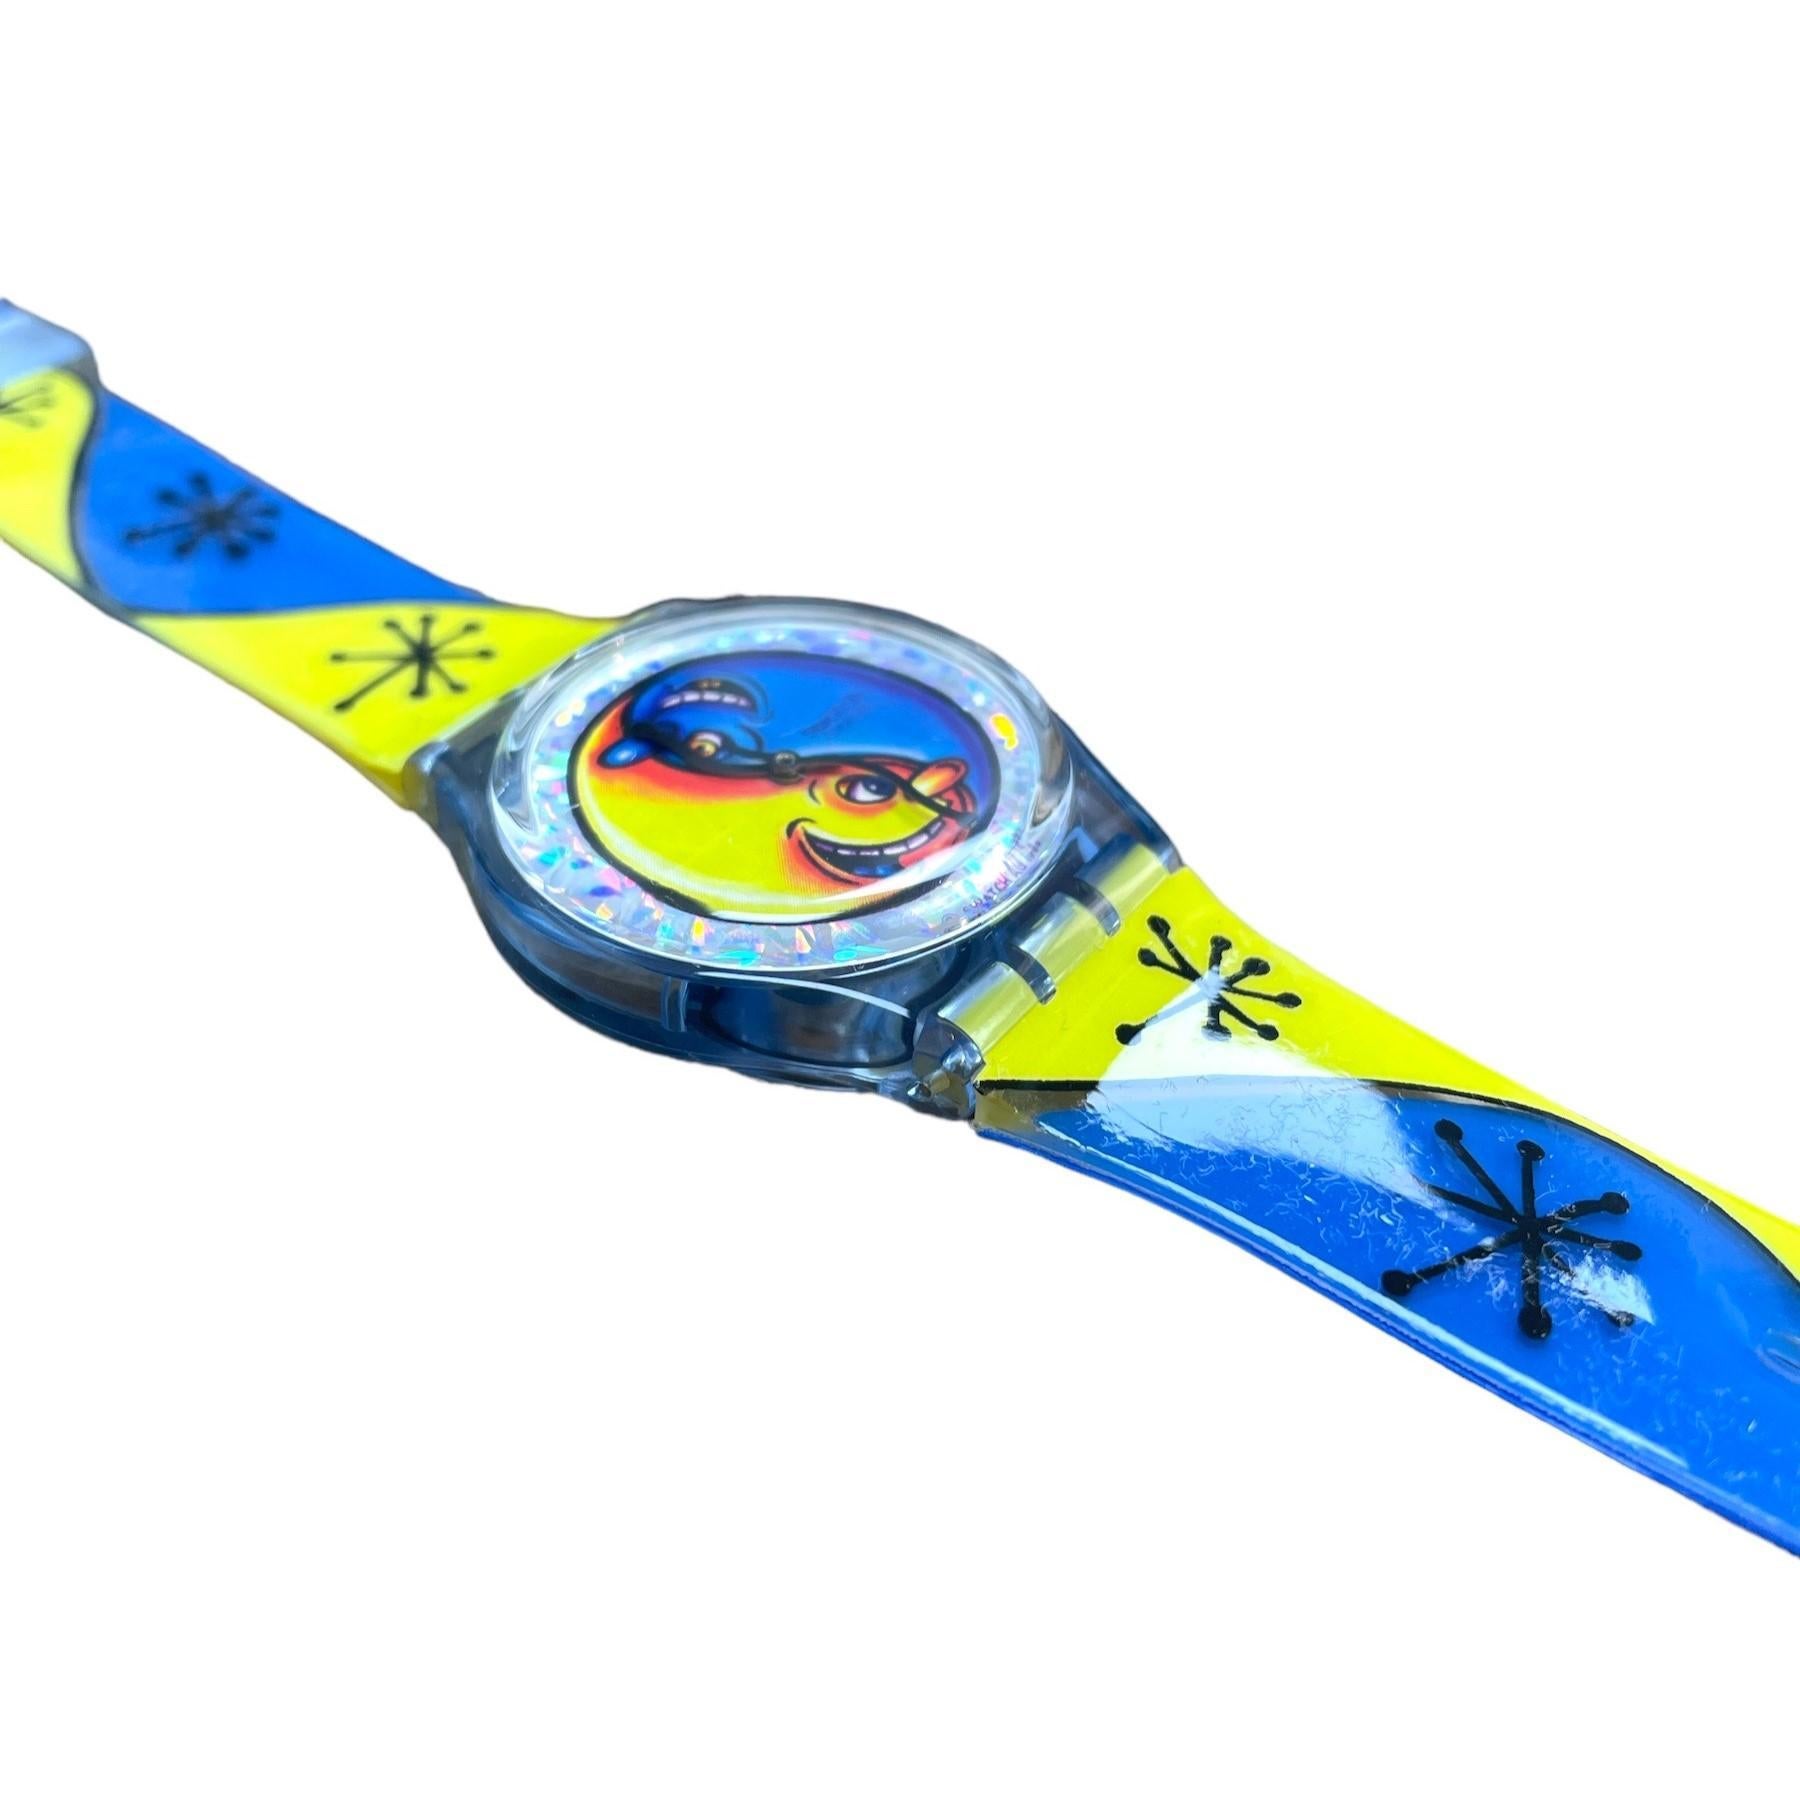 Elevate your style with this iconic limited edition Swatch Fiz N'Zip designed by the renowned artist Kenny Scharf. A true collector's item from the 1990s, this unworn timepiece boasts both artistic flair and precision engineering.

Display: